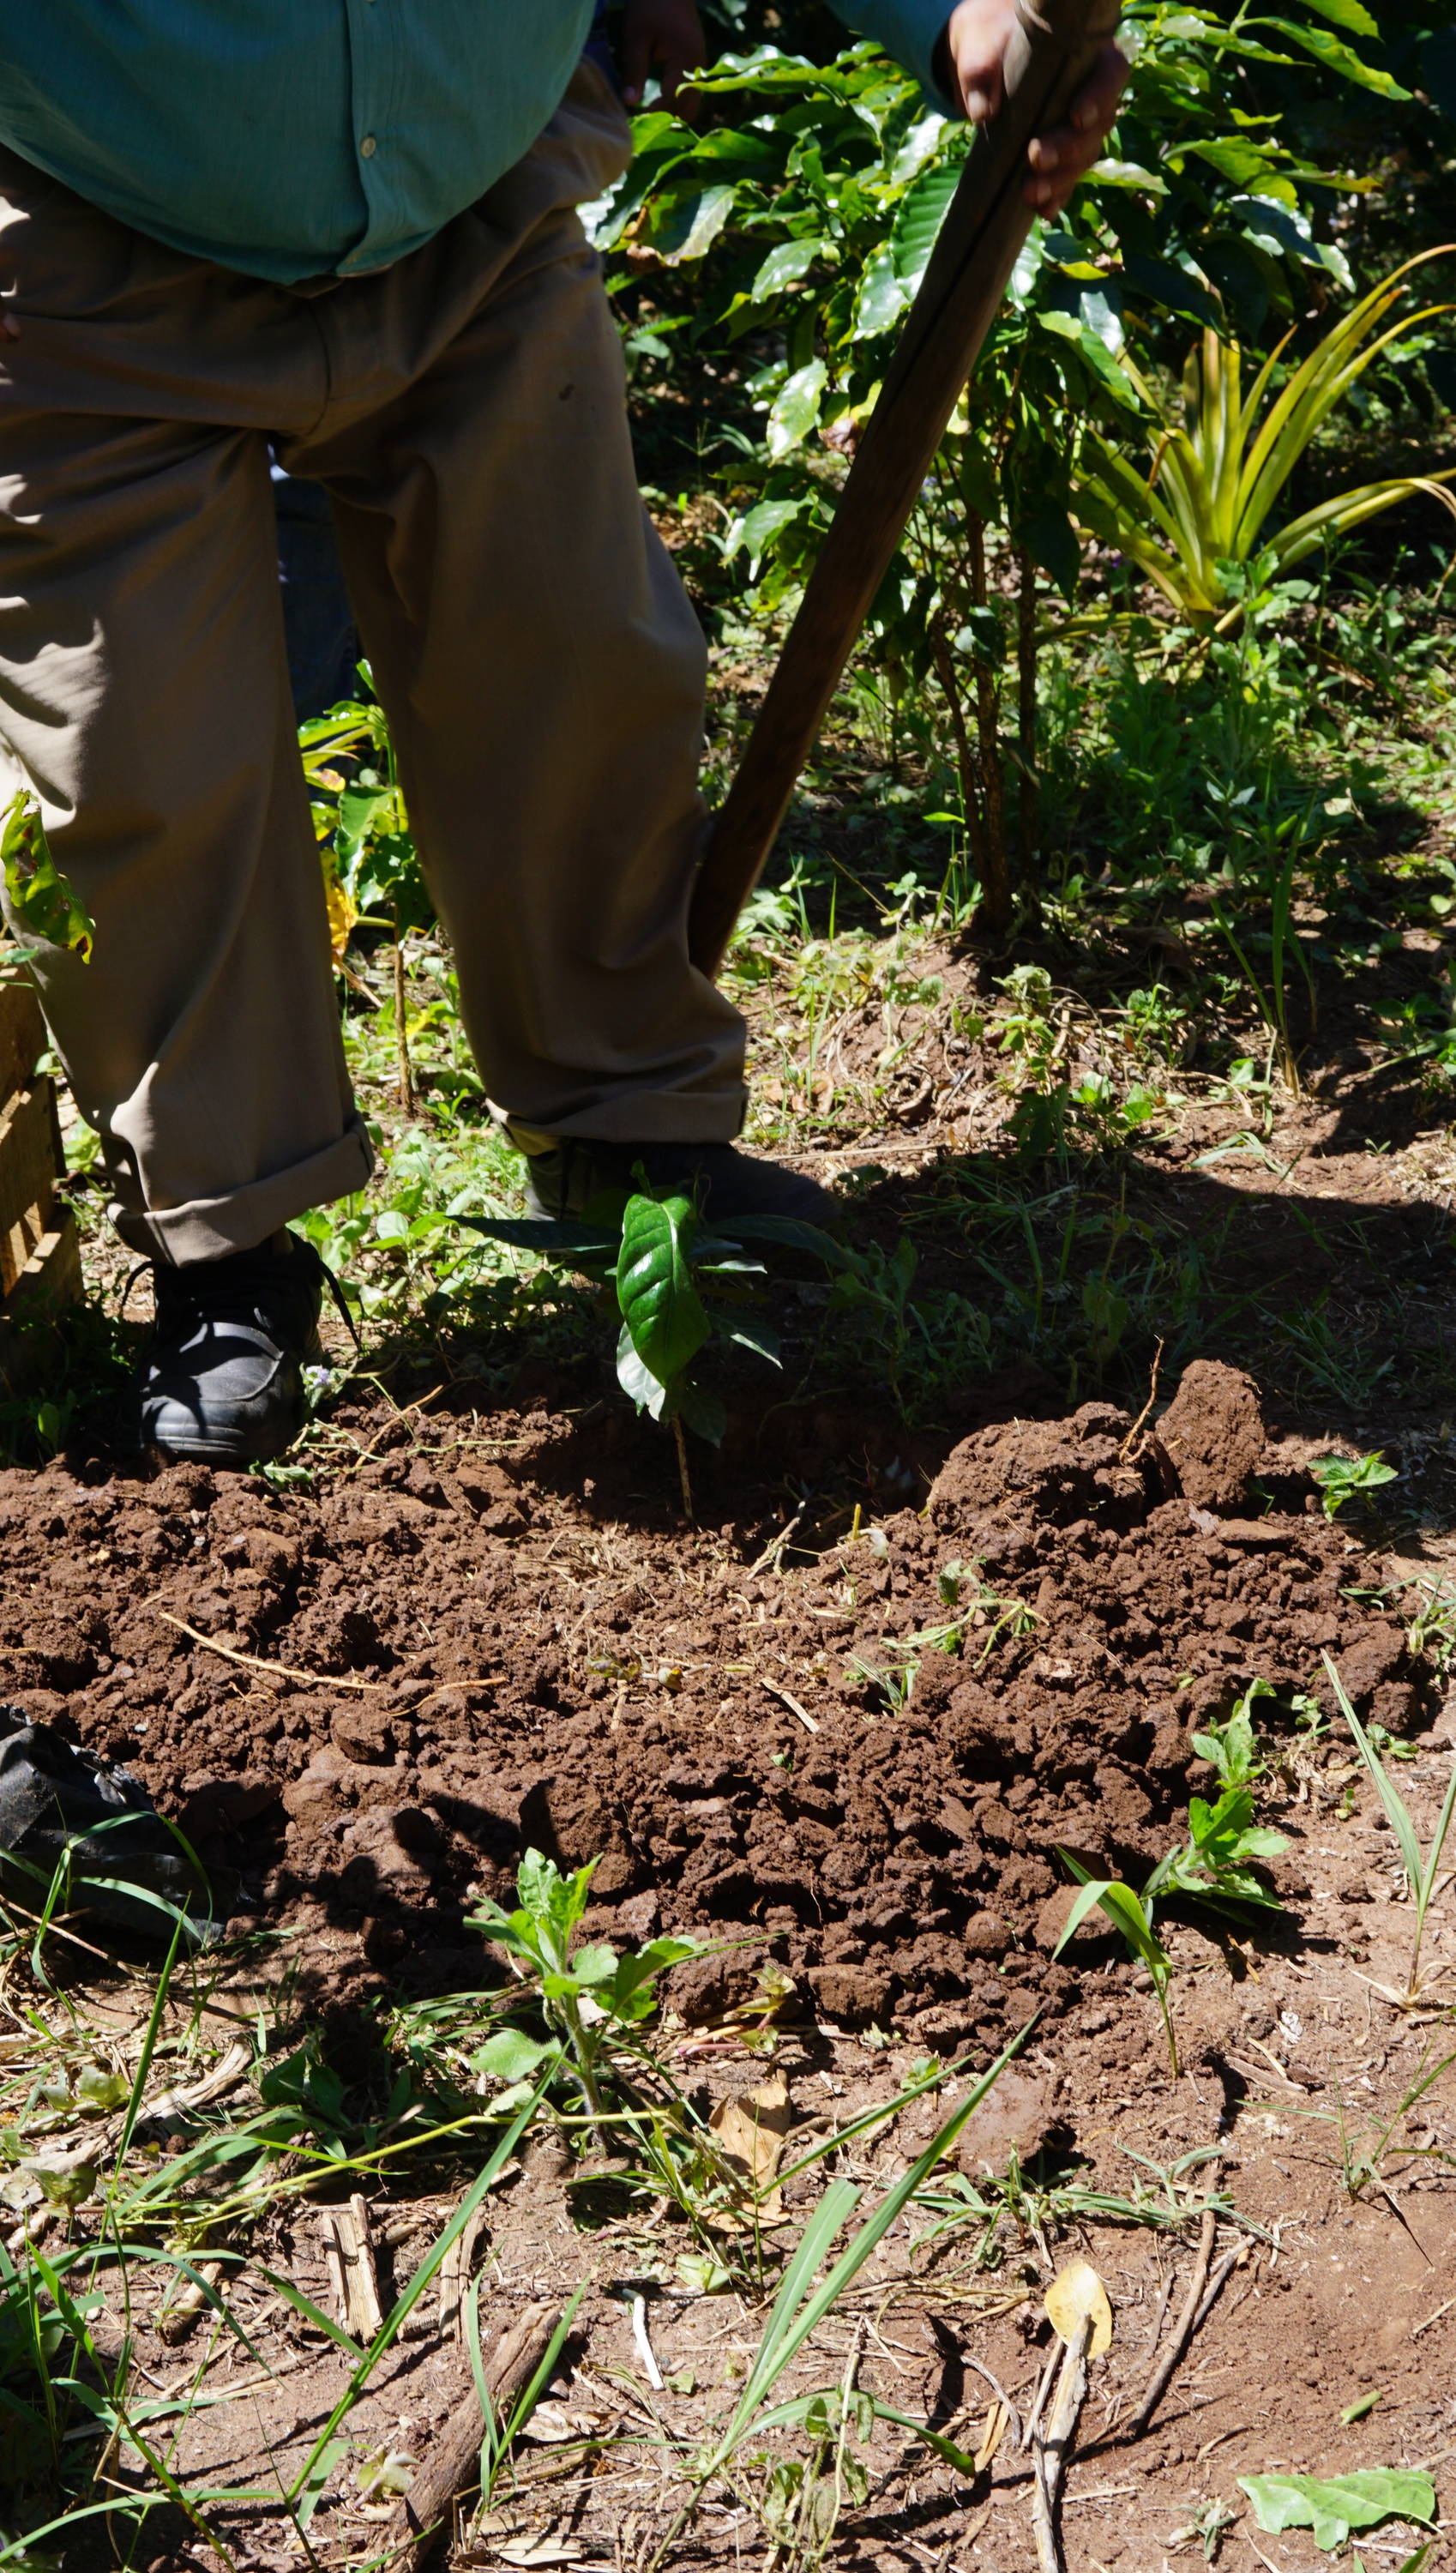 A new coffee sapling being planted in the Amaquil community in Tenejapa, Chiapas